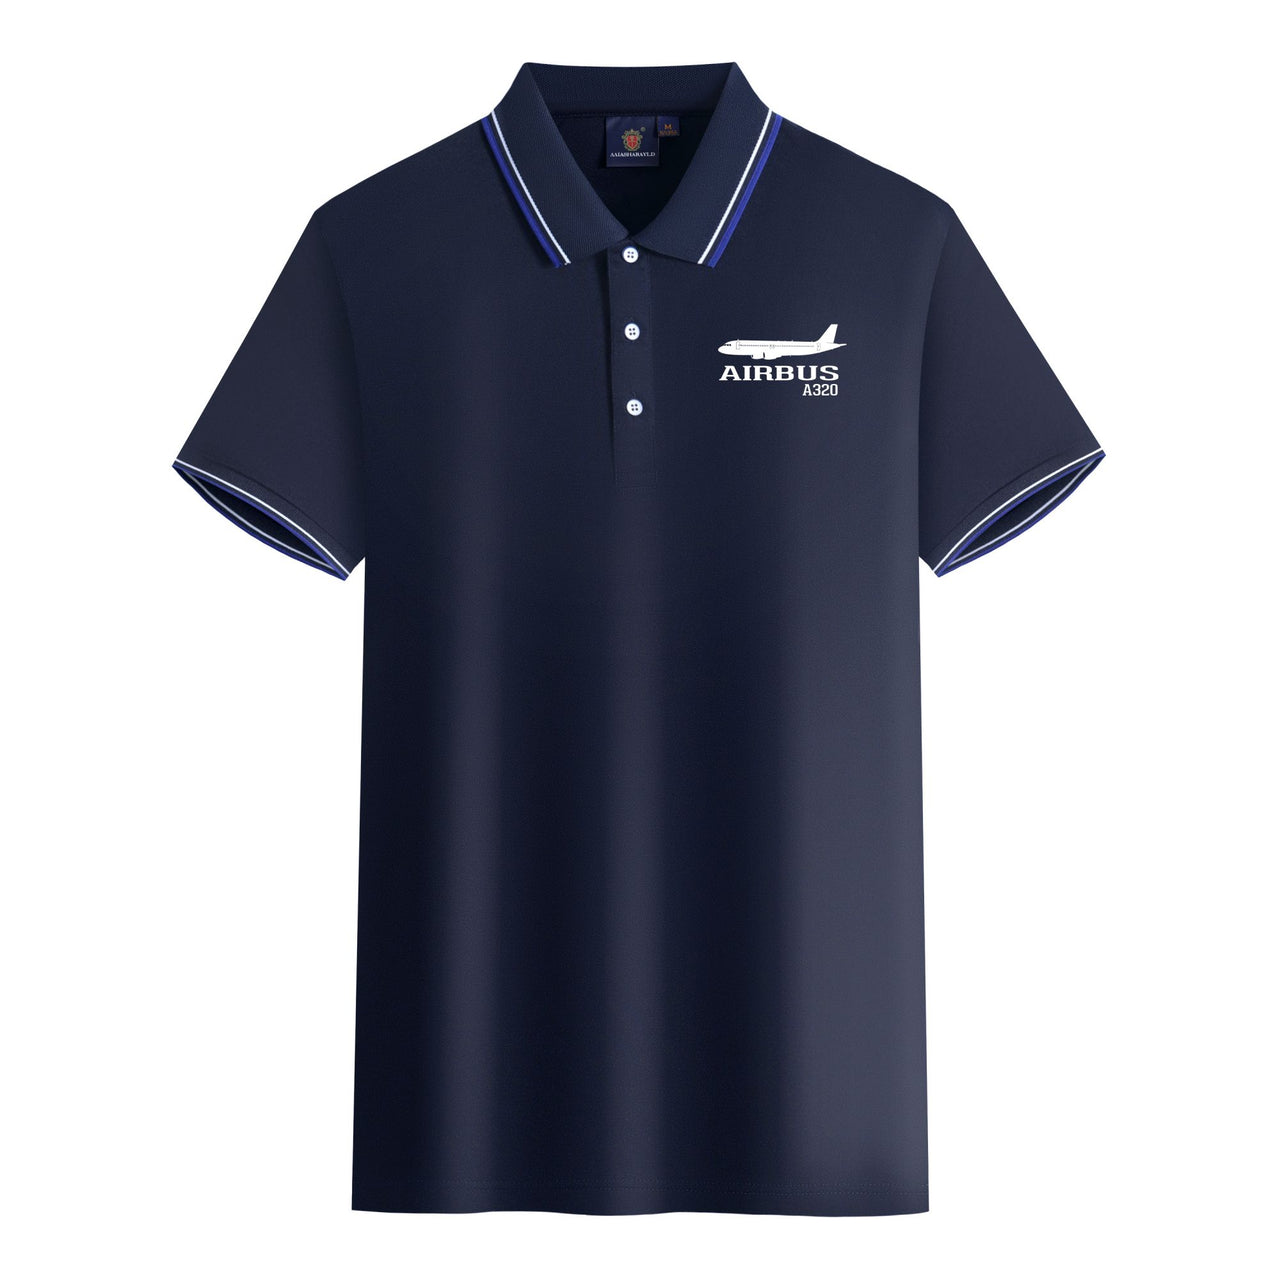 Airbus A320 Printed Designed Stylish Polo T-Shirts